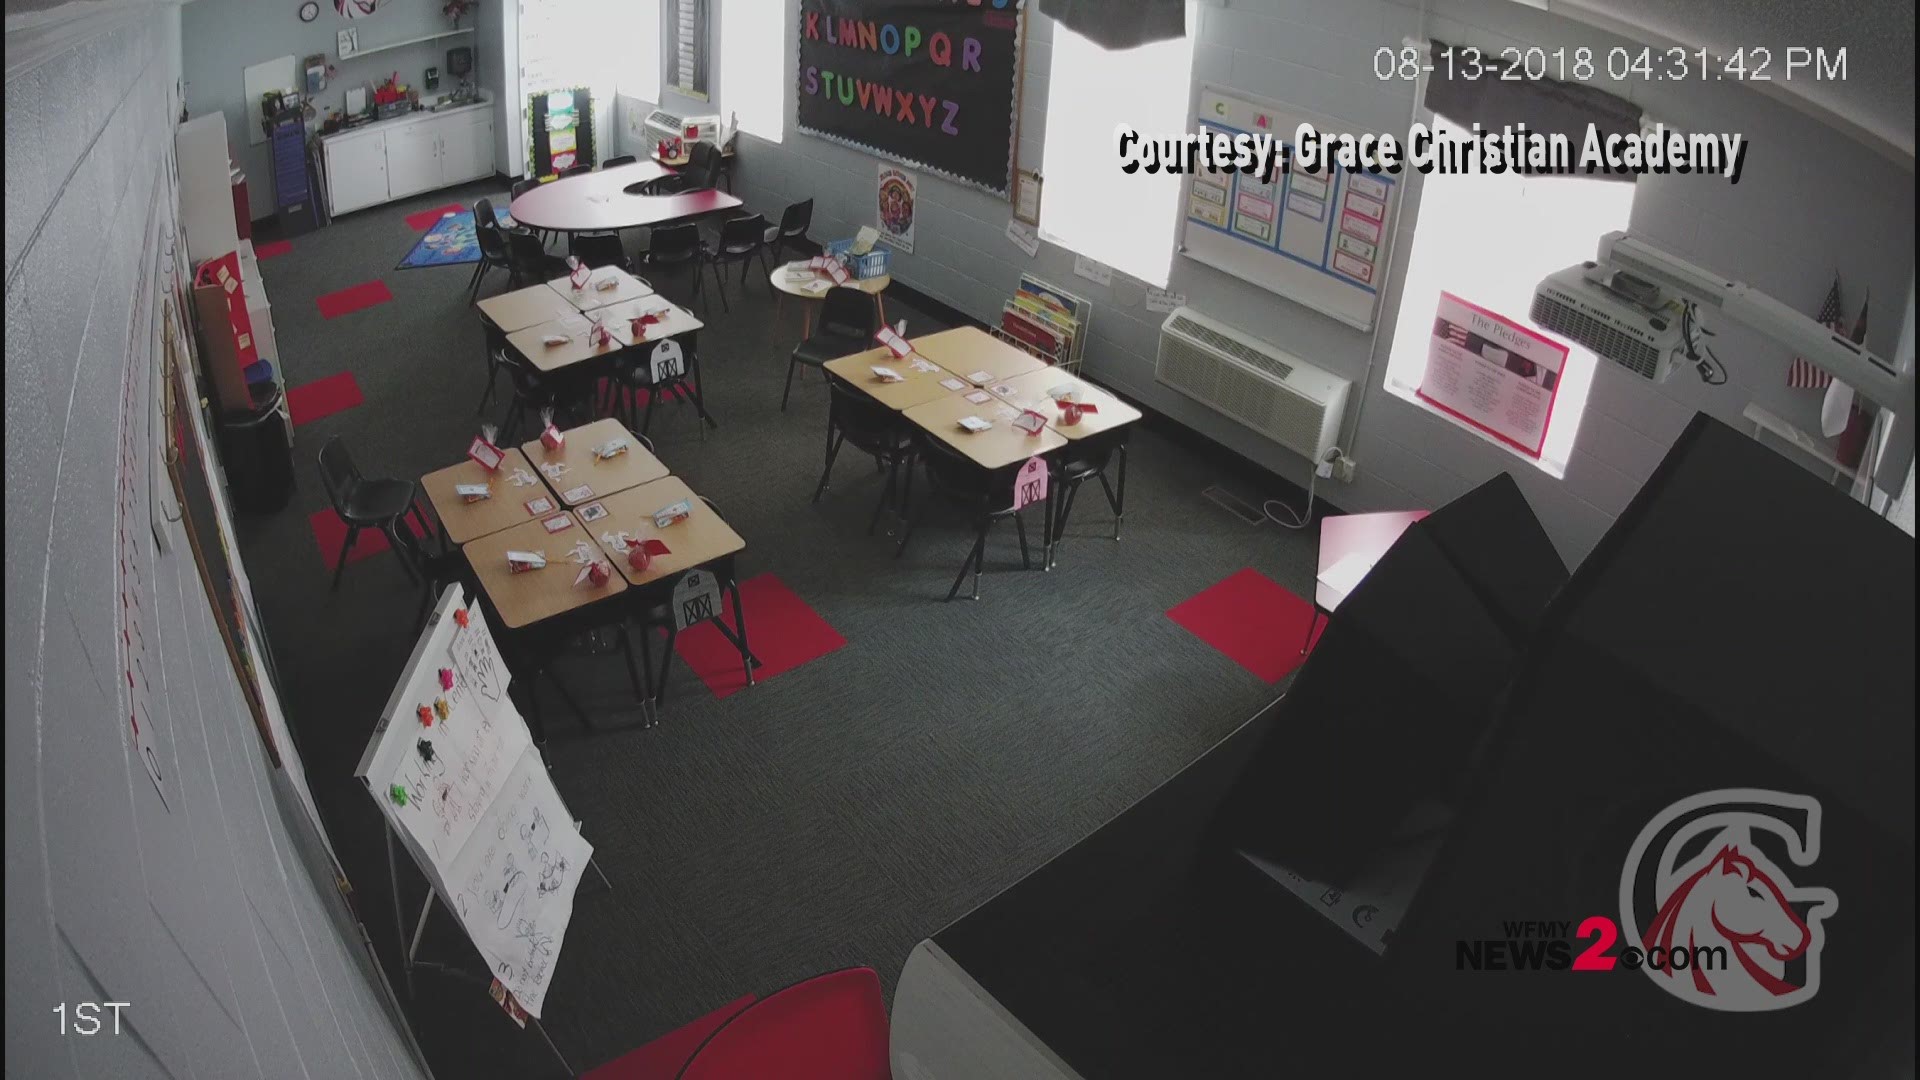 WFMY News 2 was given an exclusive copy of surveillance video from inside Grace Christian Academy which is a school located at the church. The video shows the exact moment the logging truck slammed into one of the classrooms